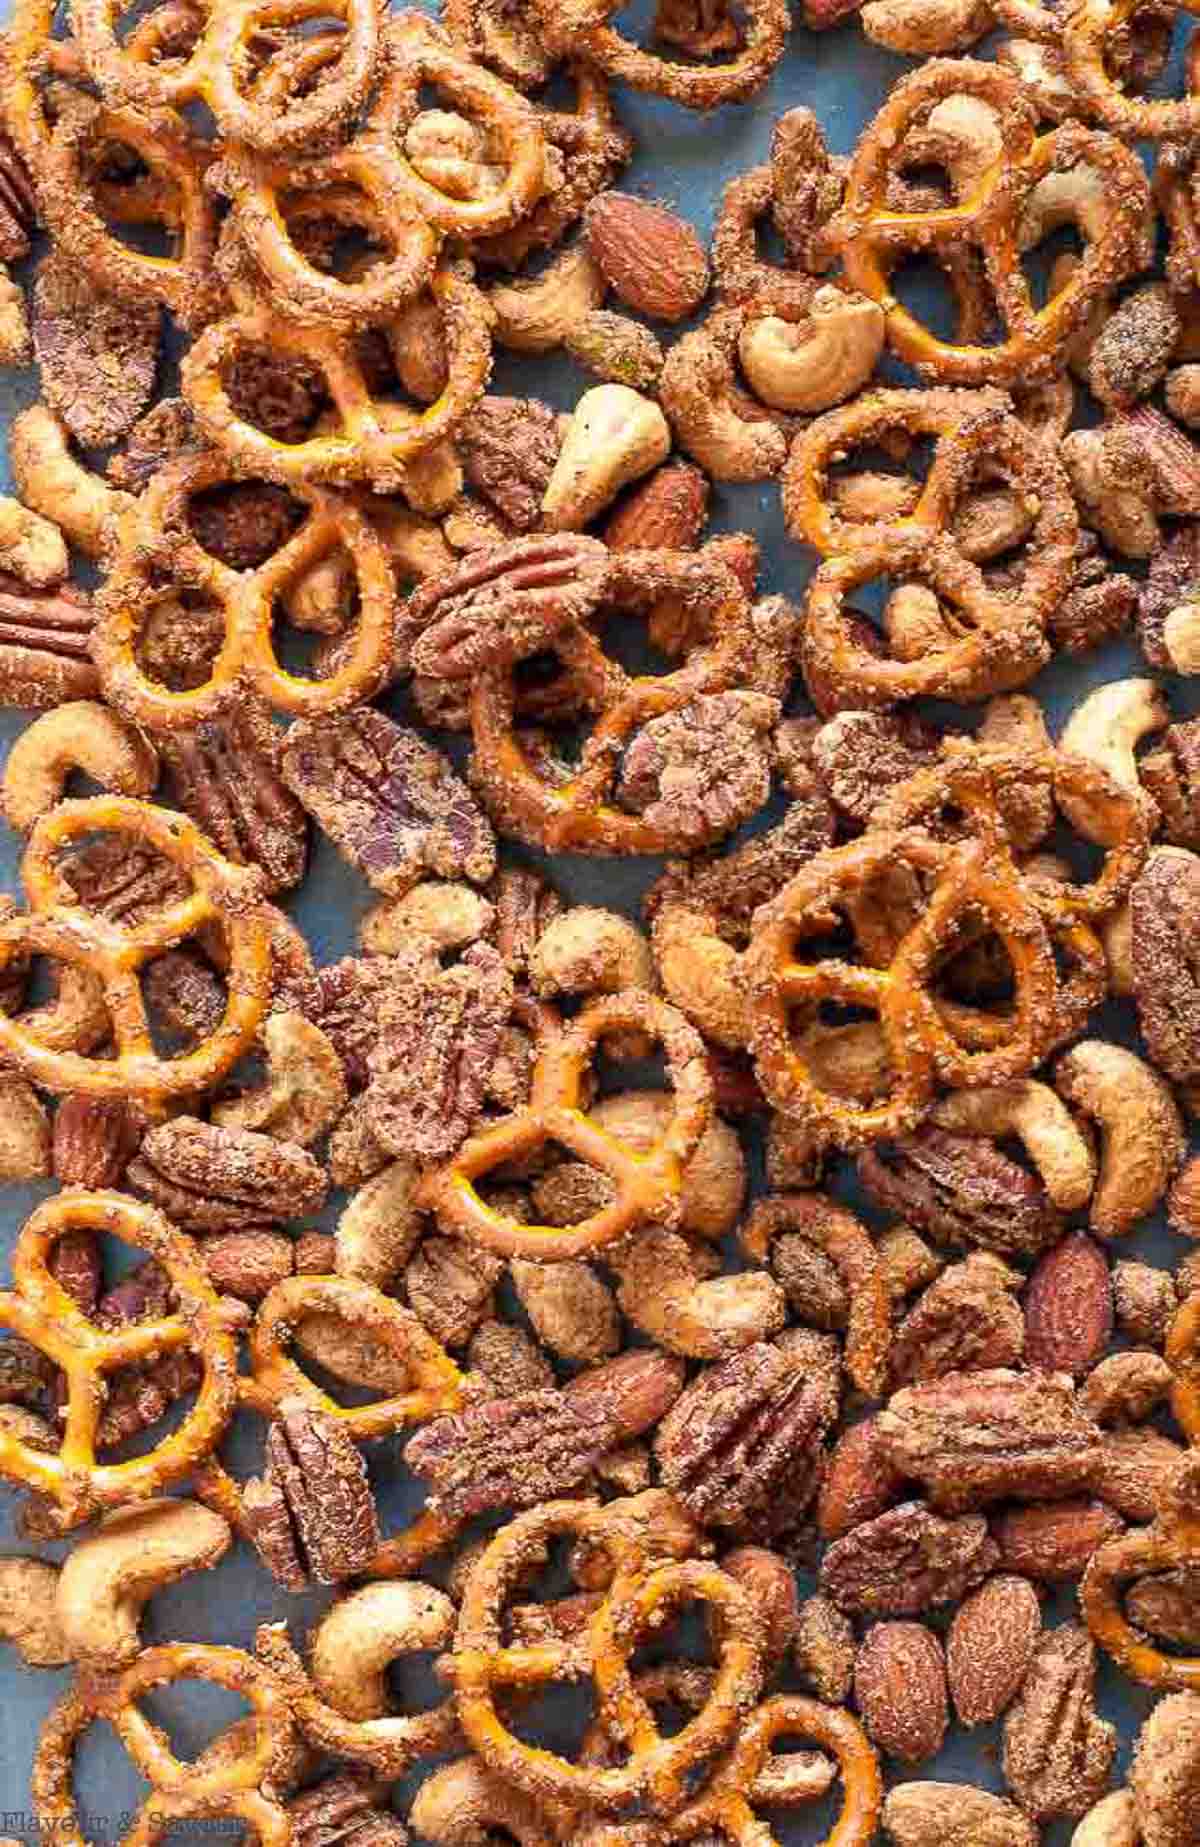 Close up view of a baking tray full of a snack mix made with pretzels and mixed nuts.